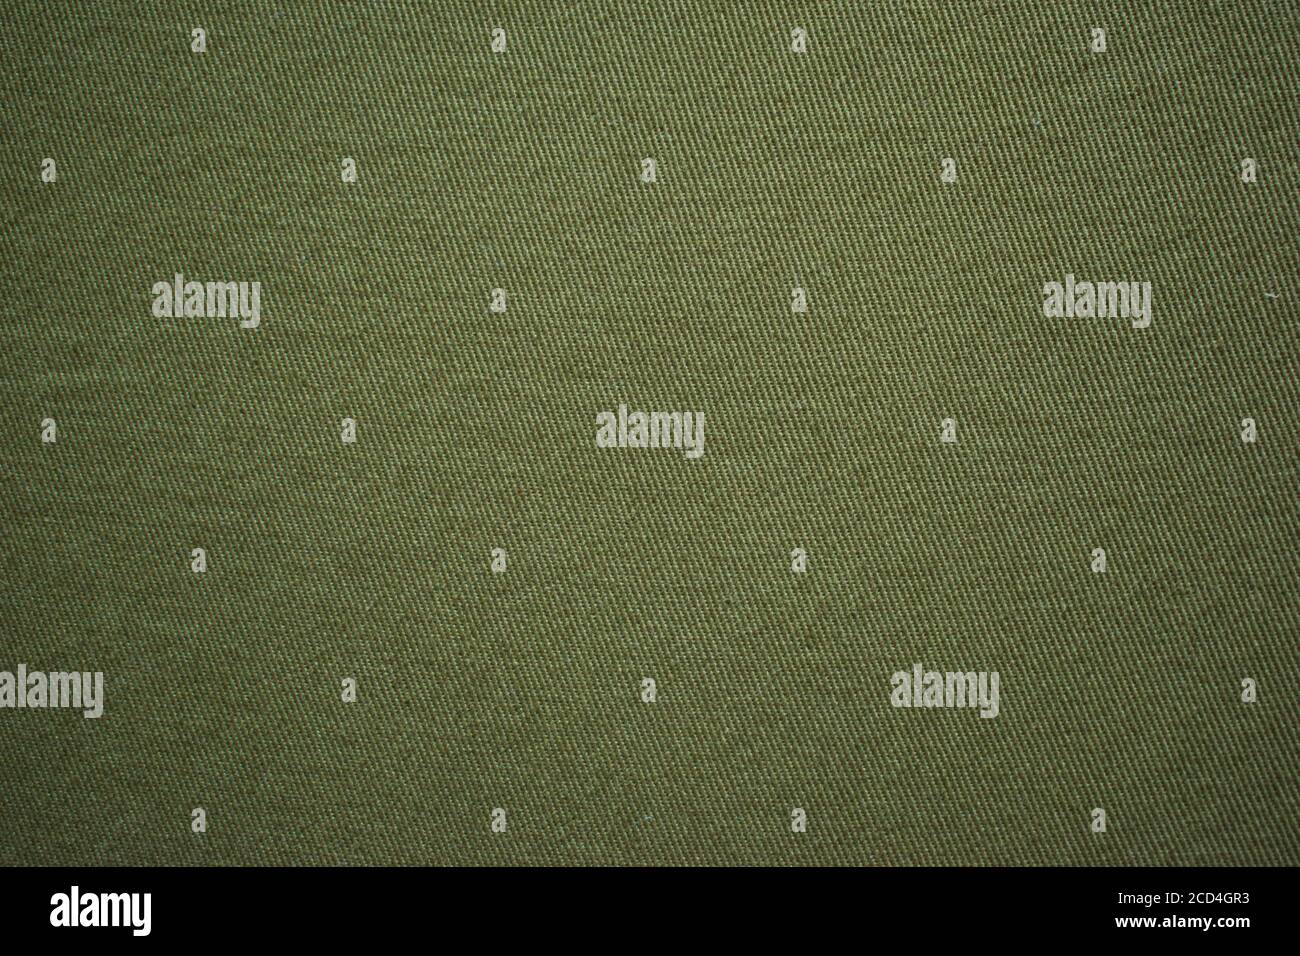 Olive green cotton vintage military fabric cloth texture Stock Photo